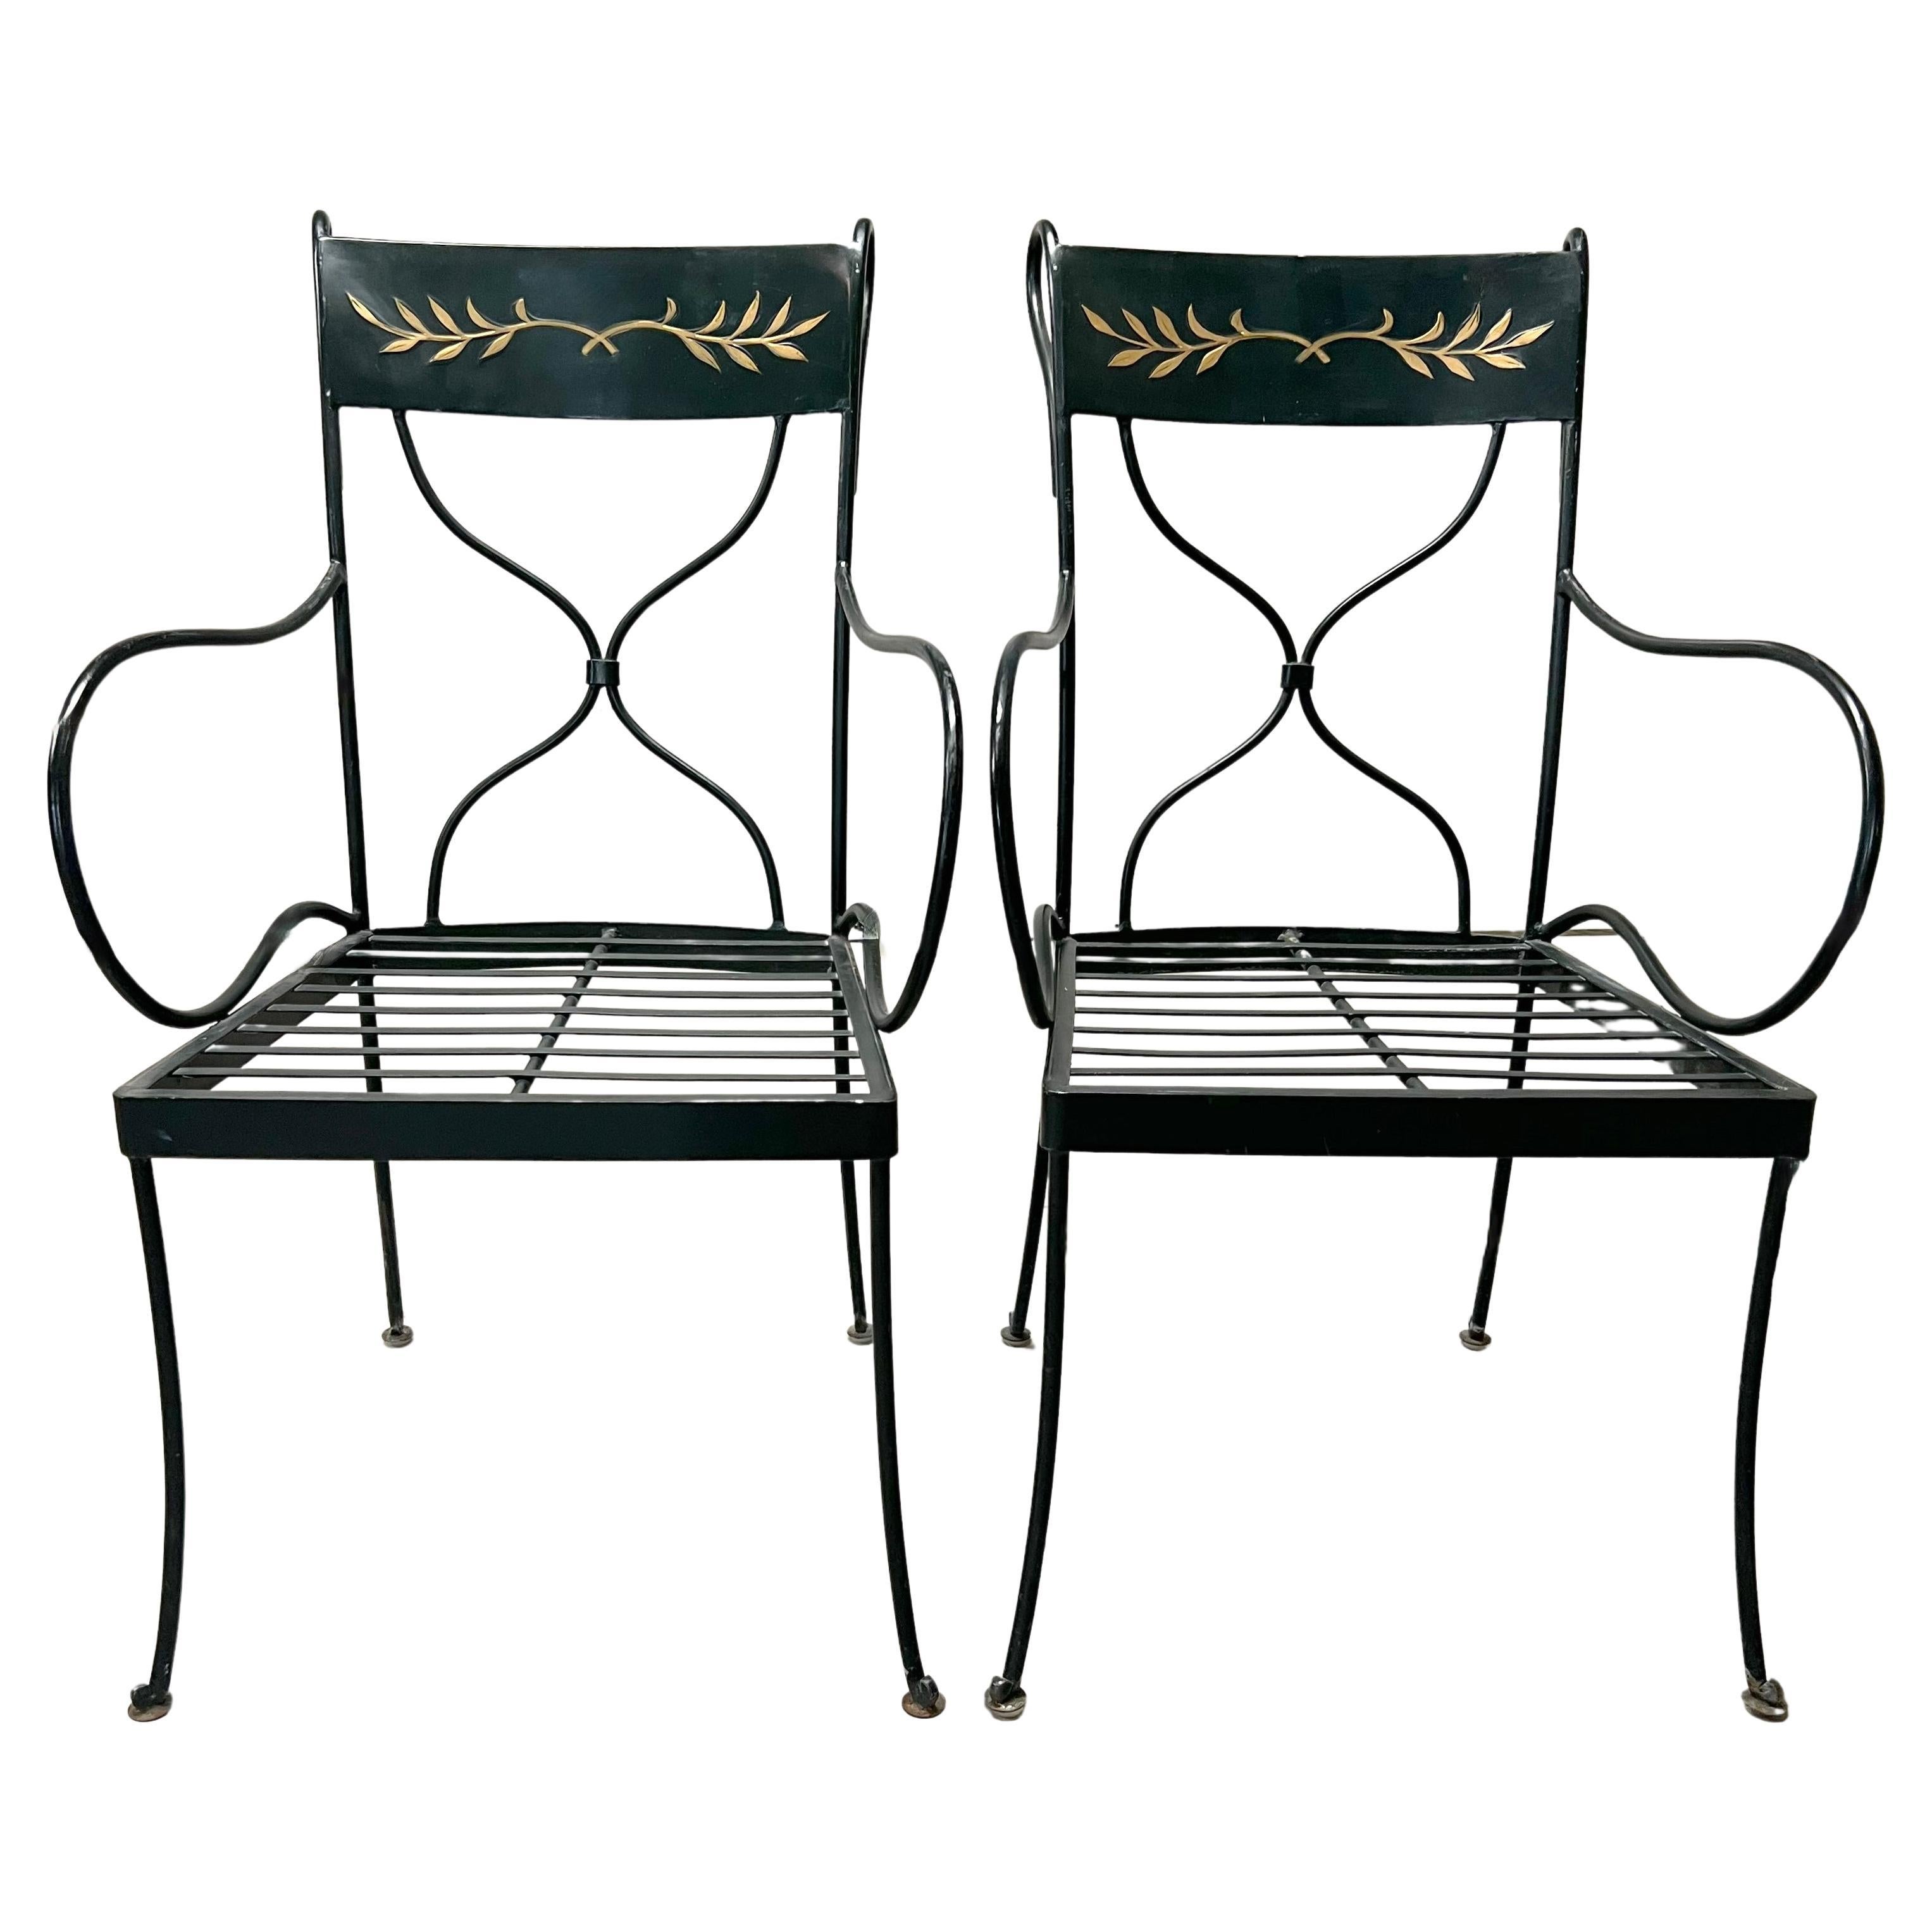 What is the best type of outdoor furniture?